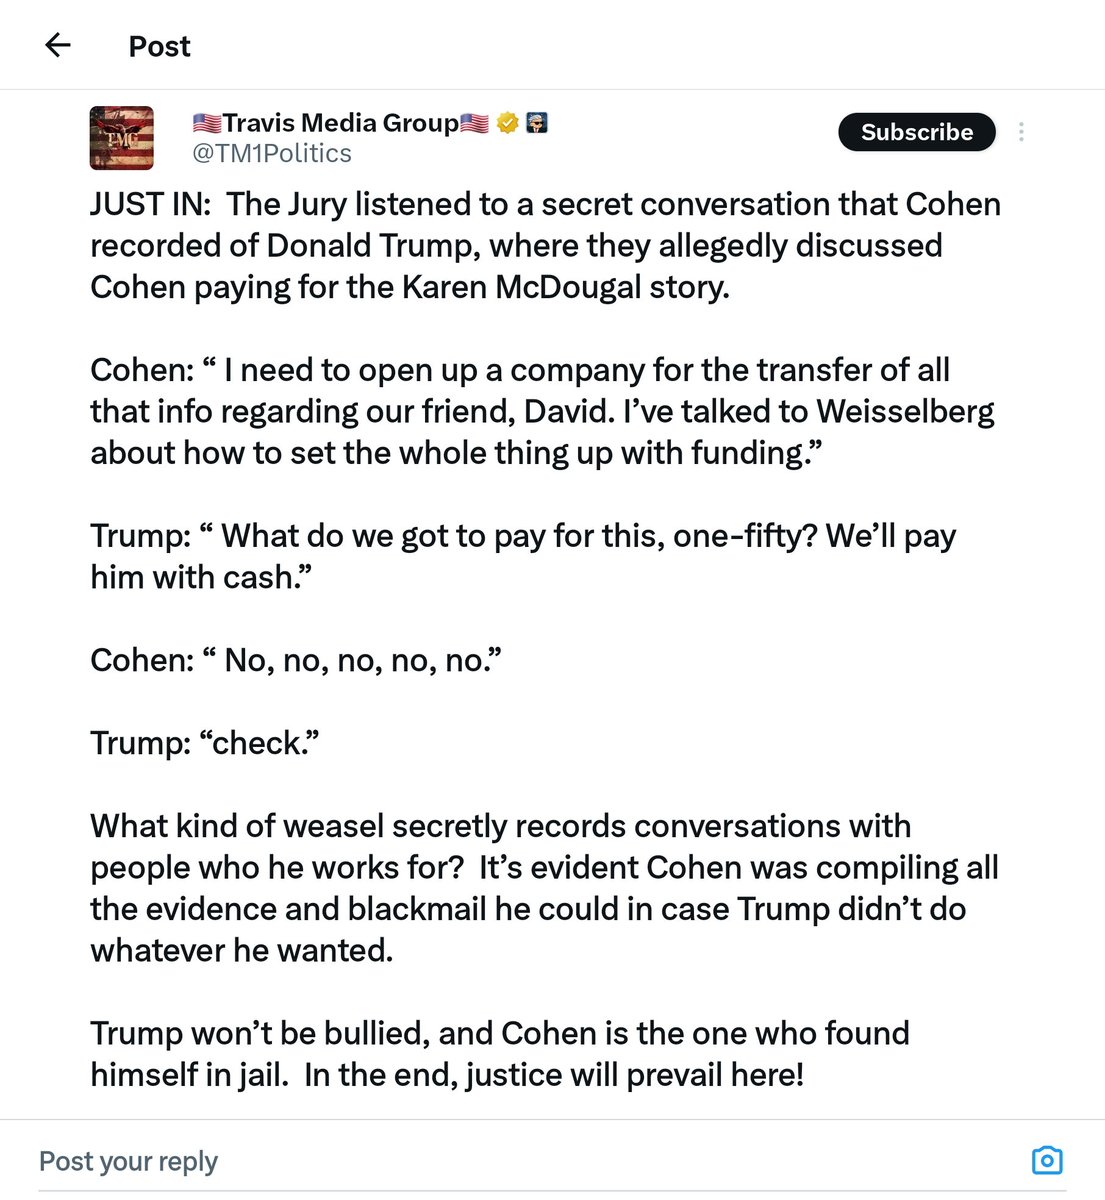 Look at this fucking clown @TM1Politics

@TM1Politics whole take away from this testimony is that Michael Cohen is a 'weasel' bcos he recorded the whole conversation — but NOT that Donald Trump basically confessed to the whole thing @TM1Politics

What a fucking idiot.